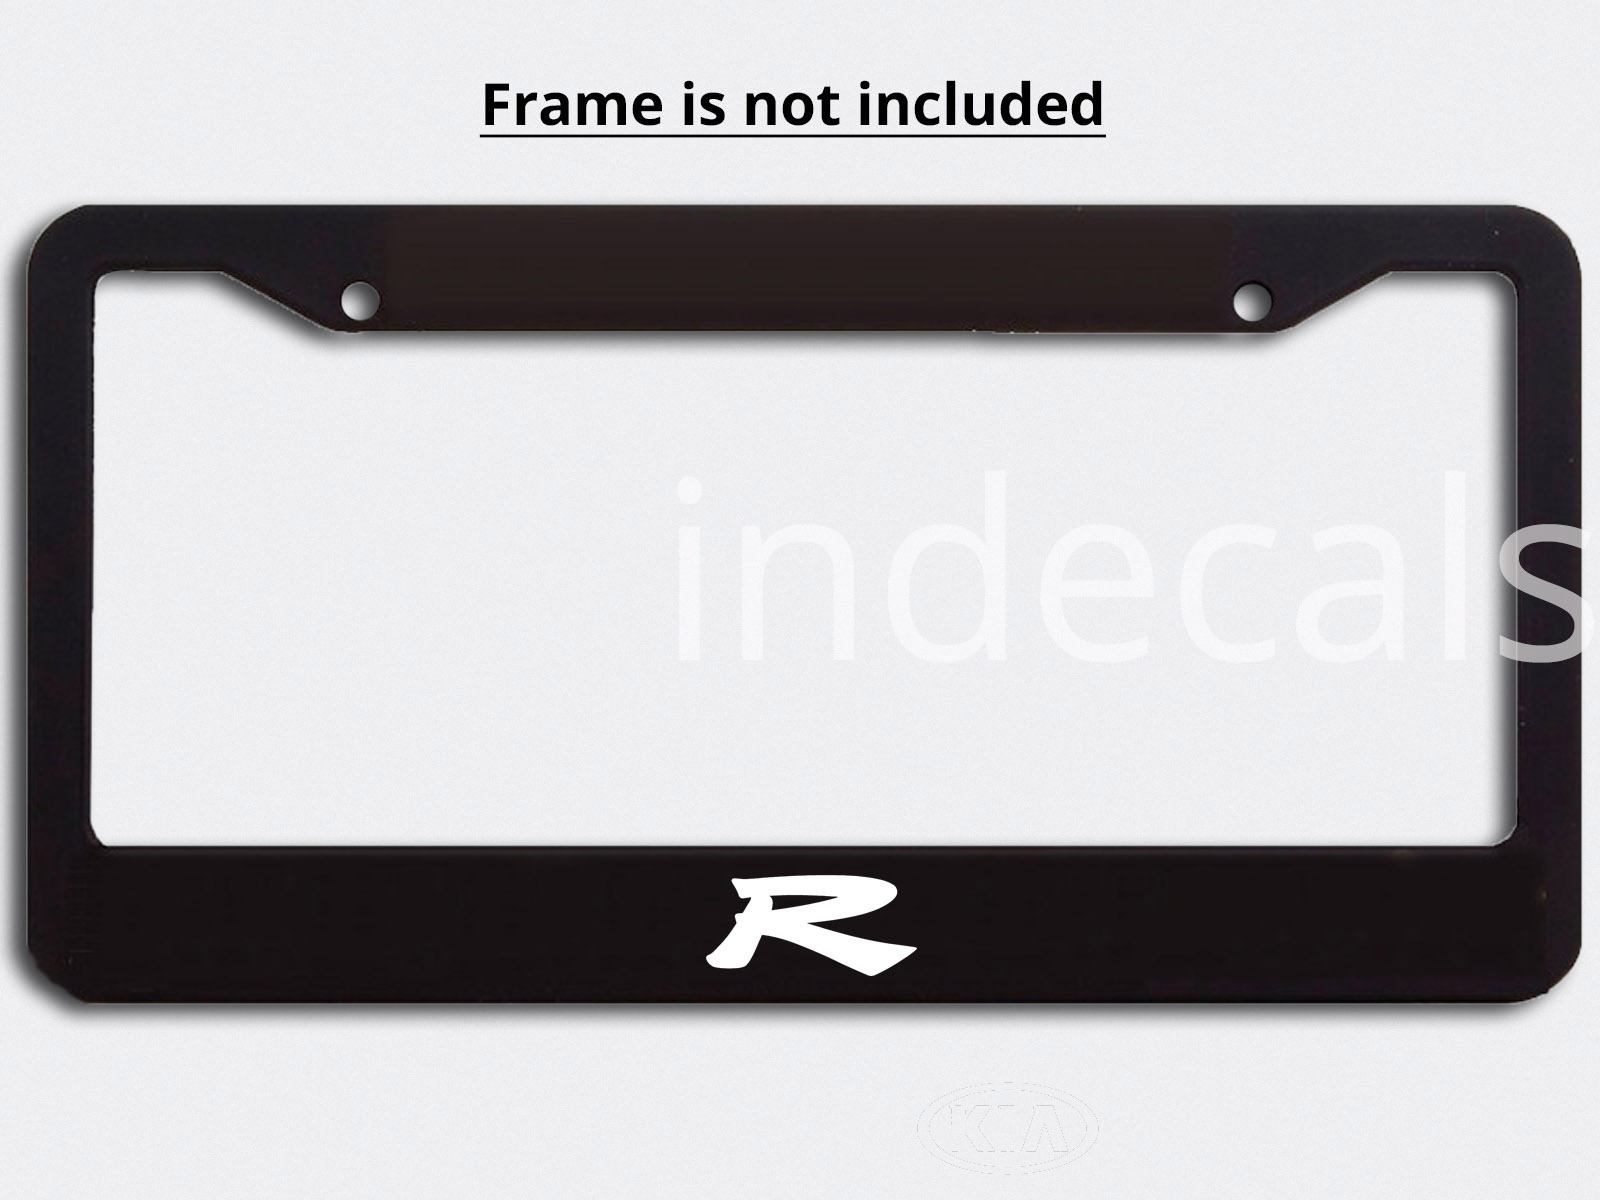 3 x Honda Type R Stickers for License Plate Frame - White